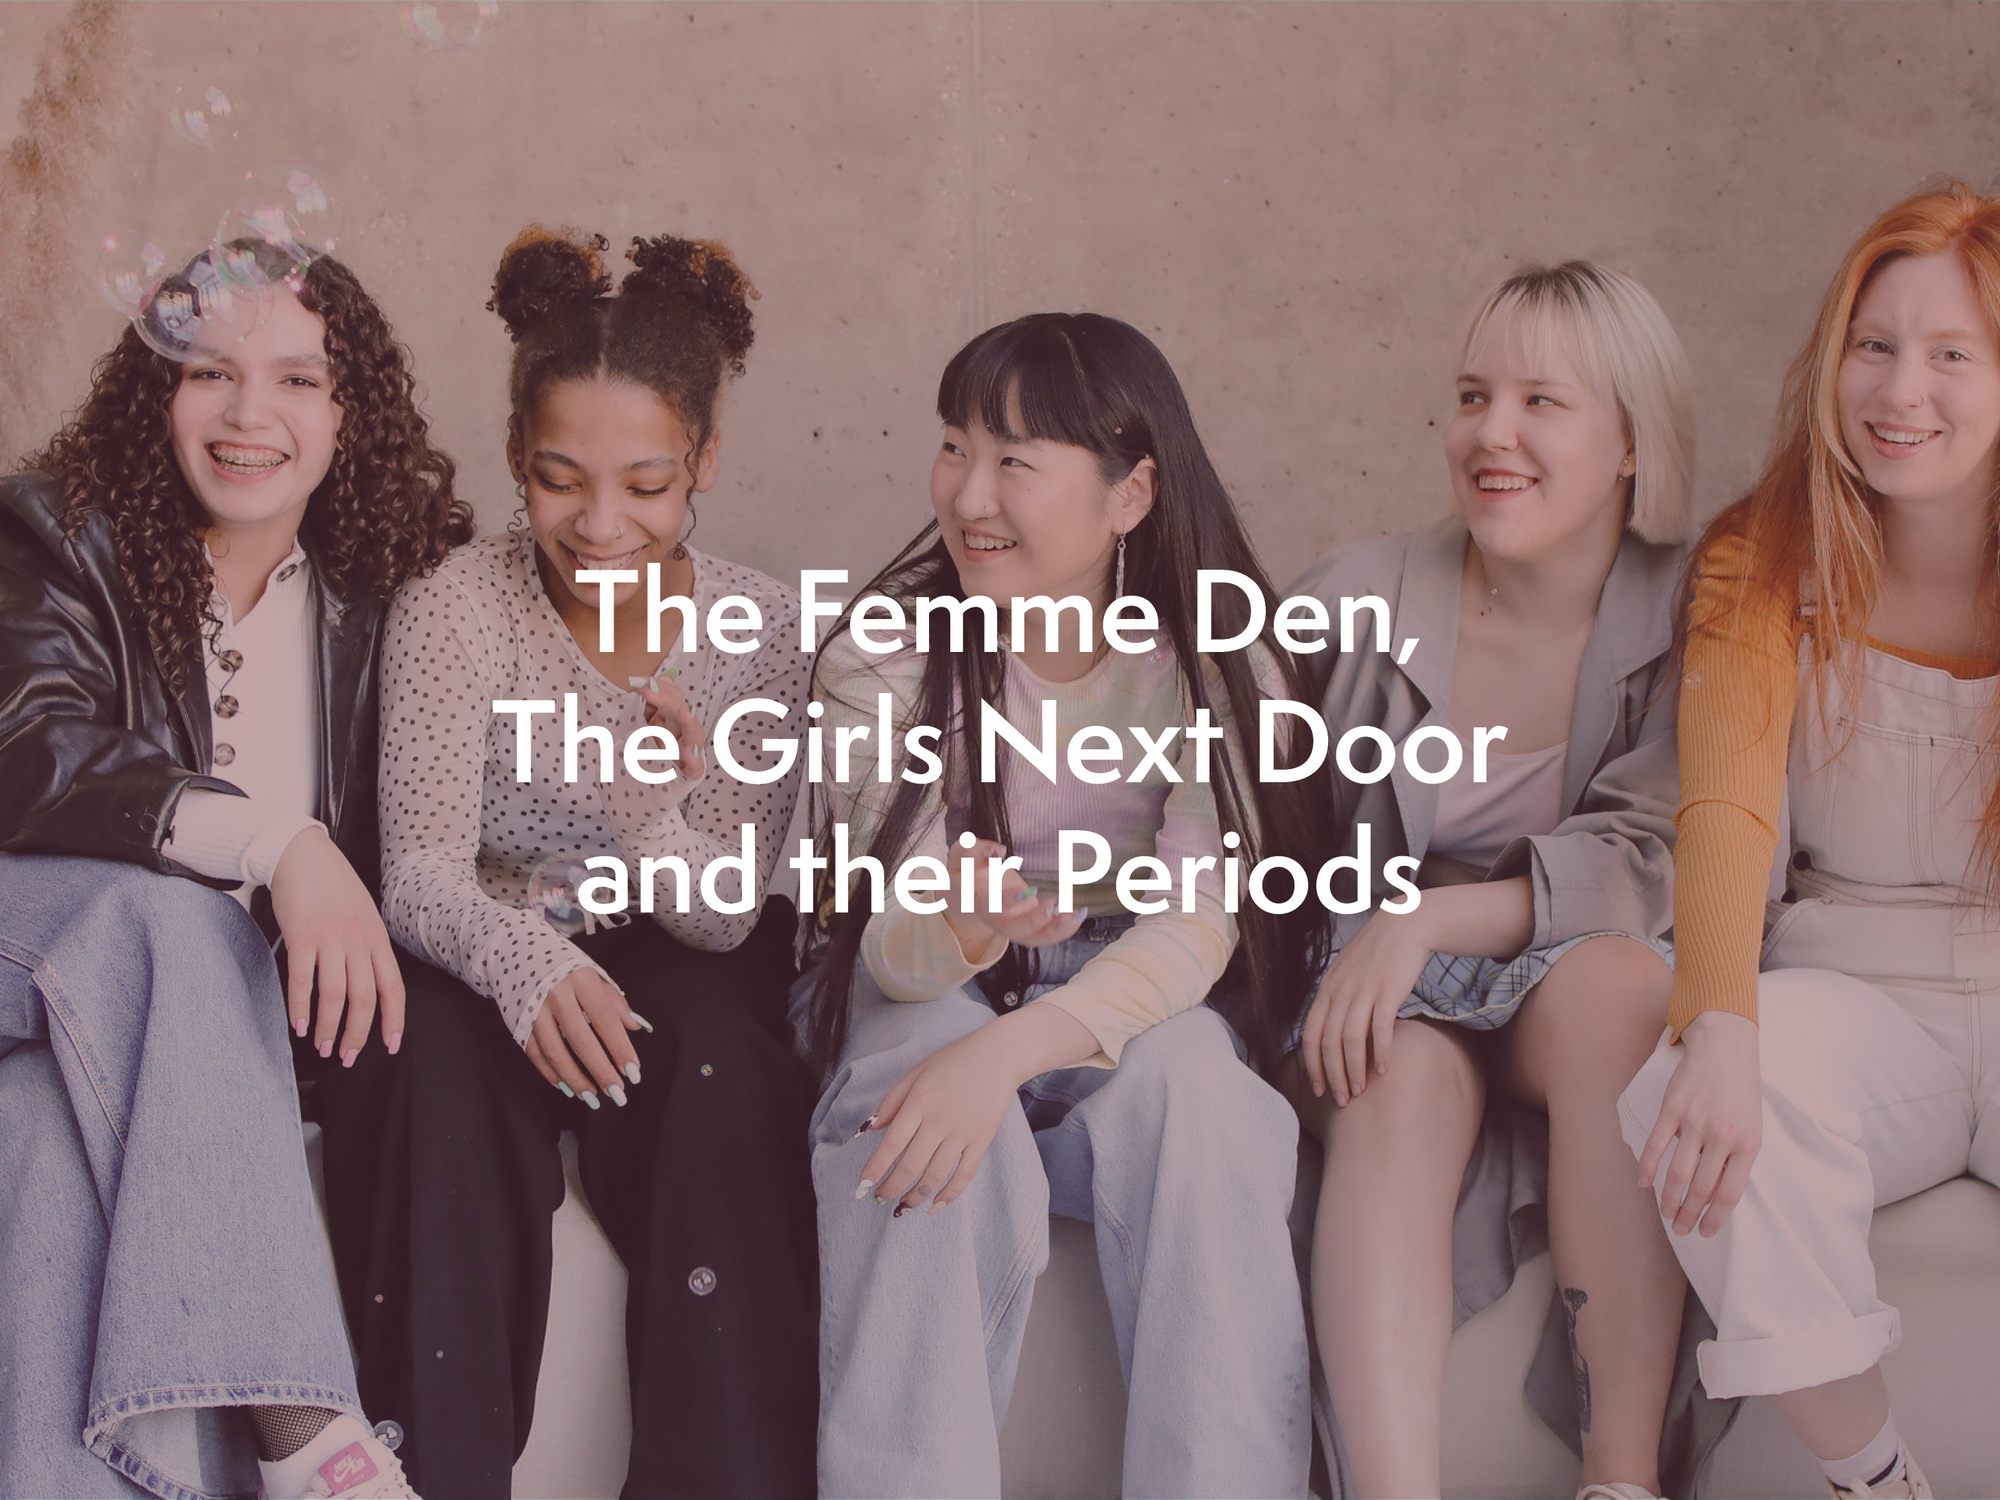 The Femme Den, The Girls Next Door and their Periods.